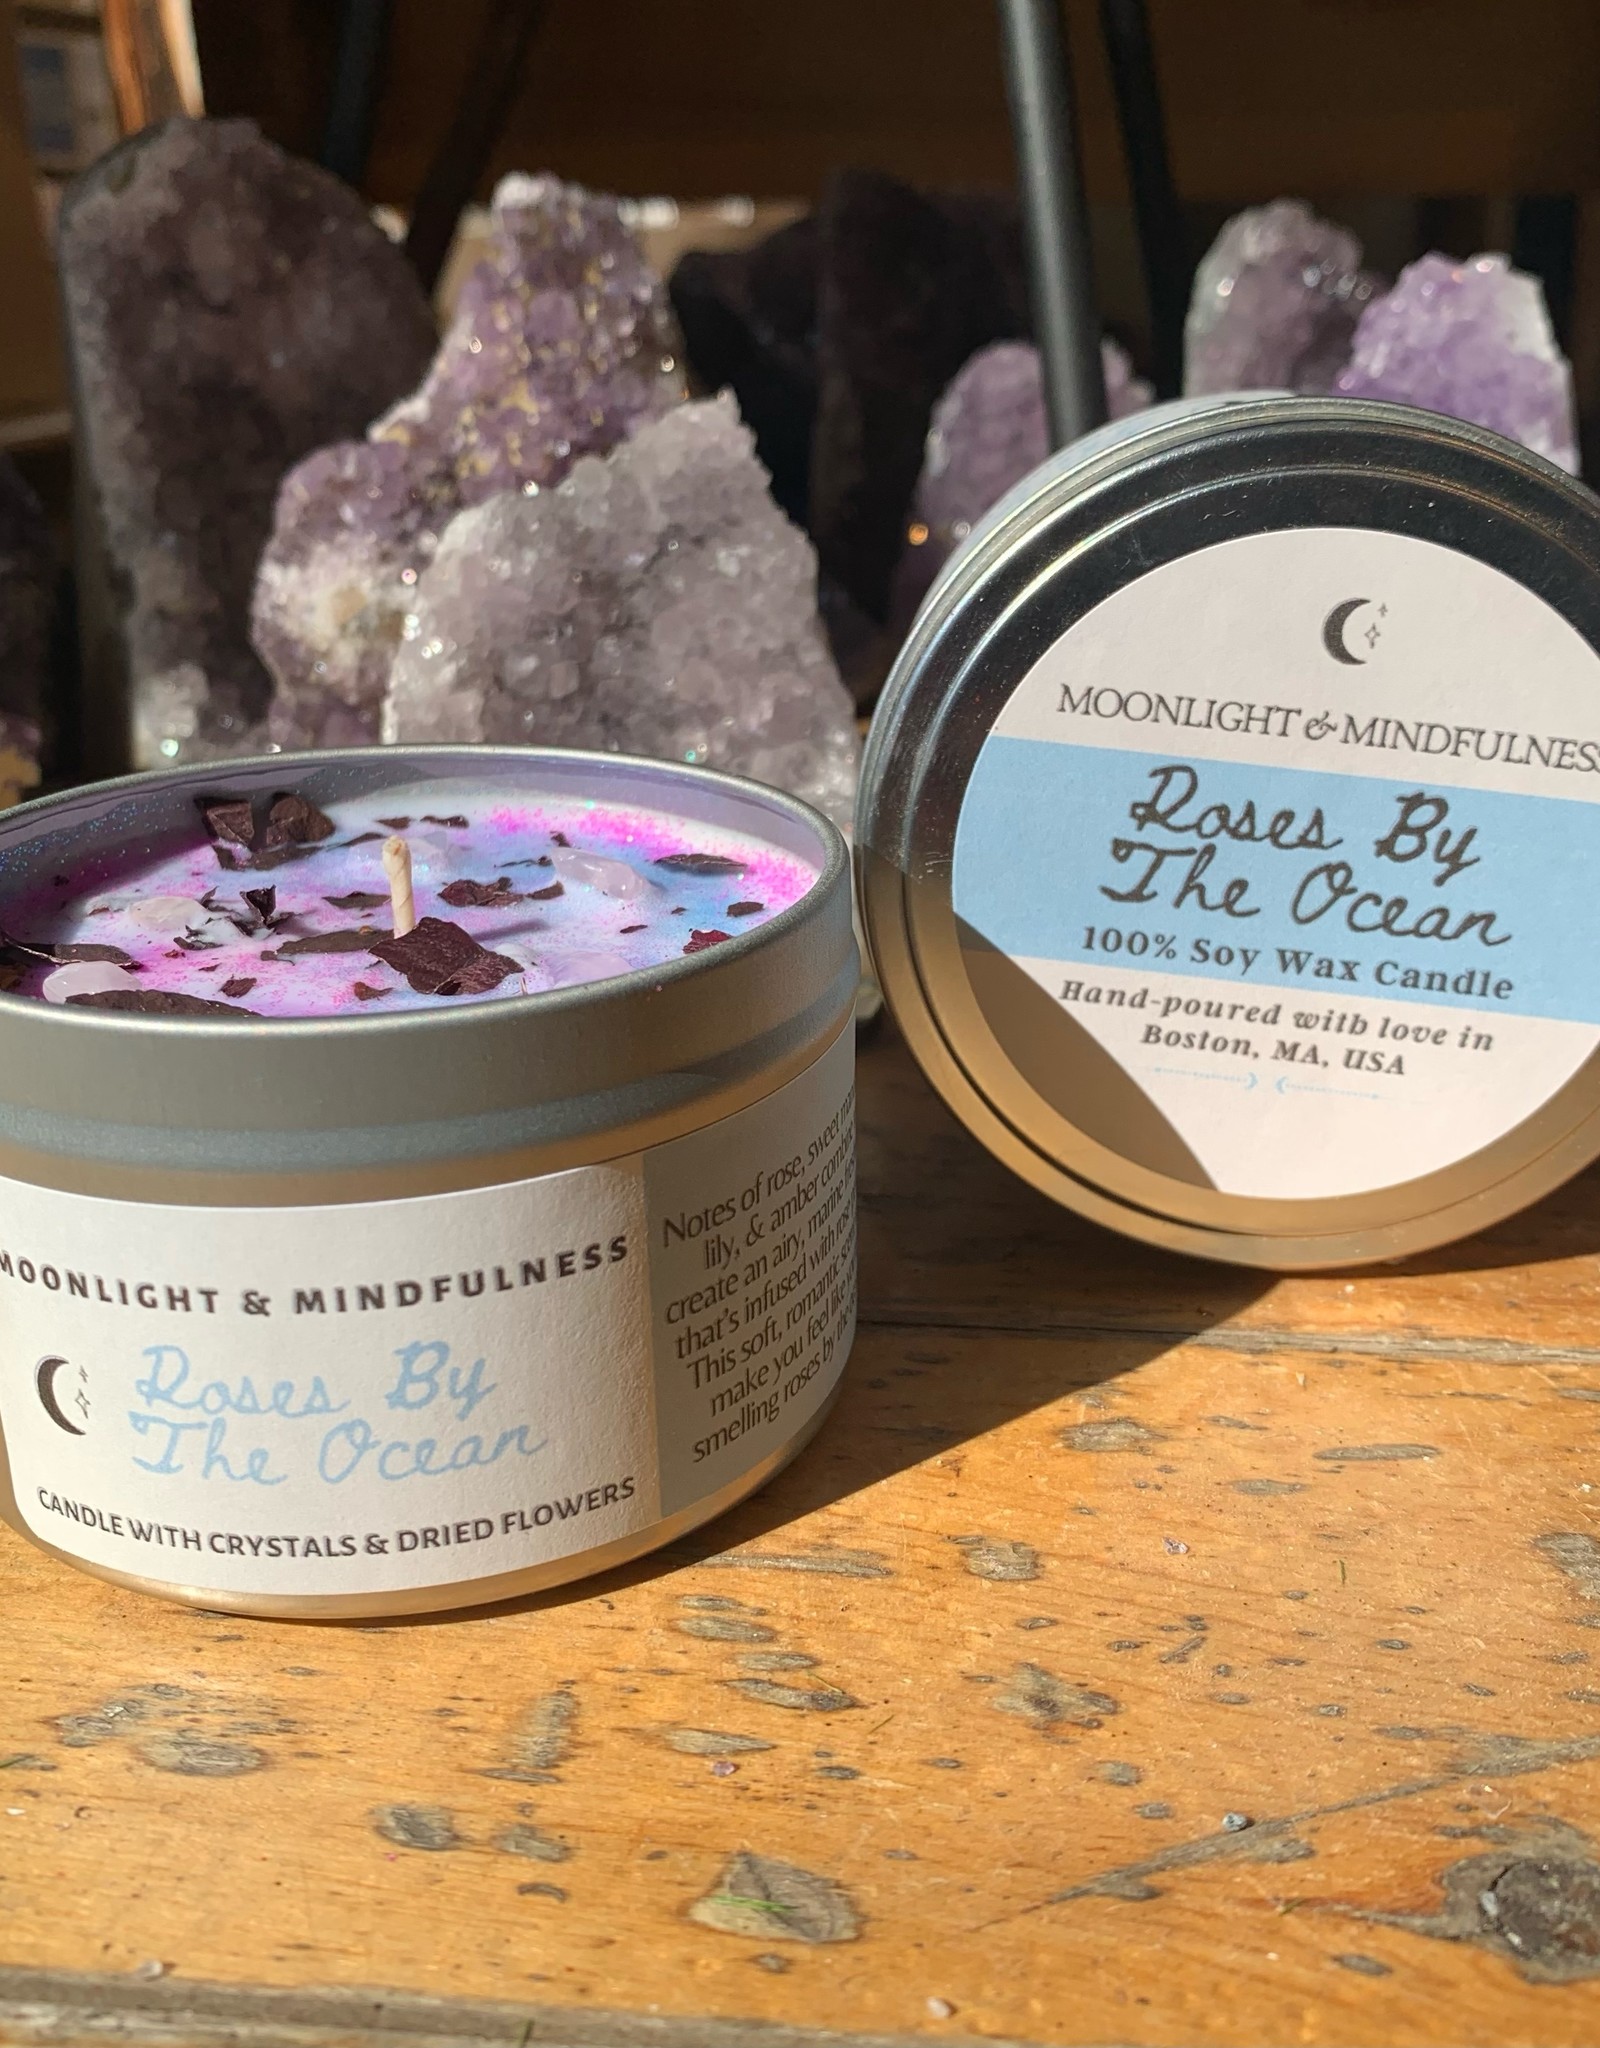 Moonlight and Mindfulness Roses by the Ocean 8oz Candle